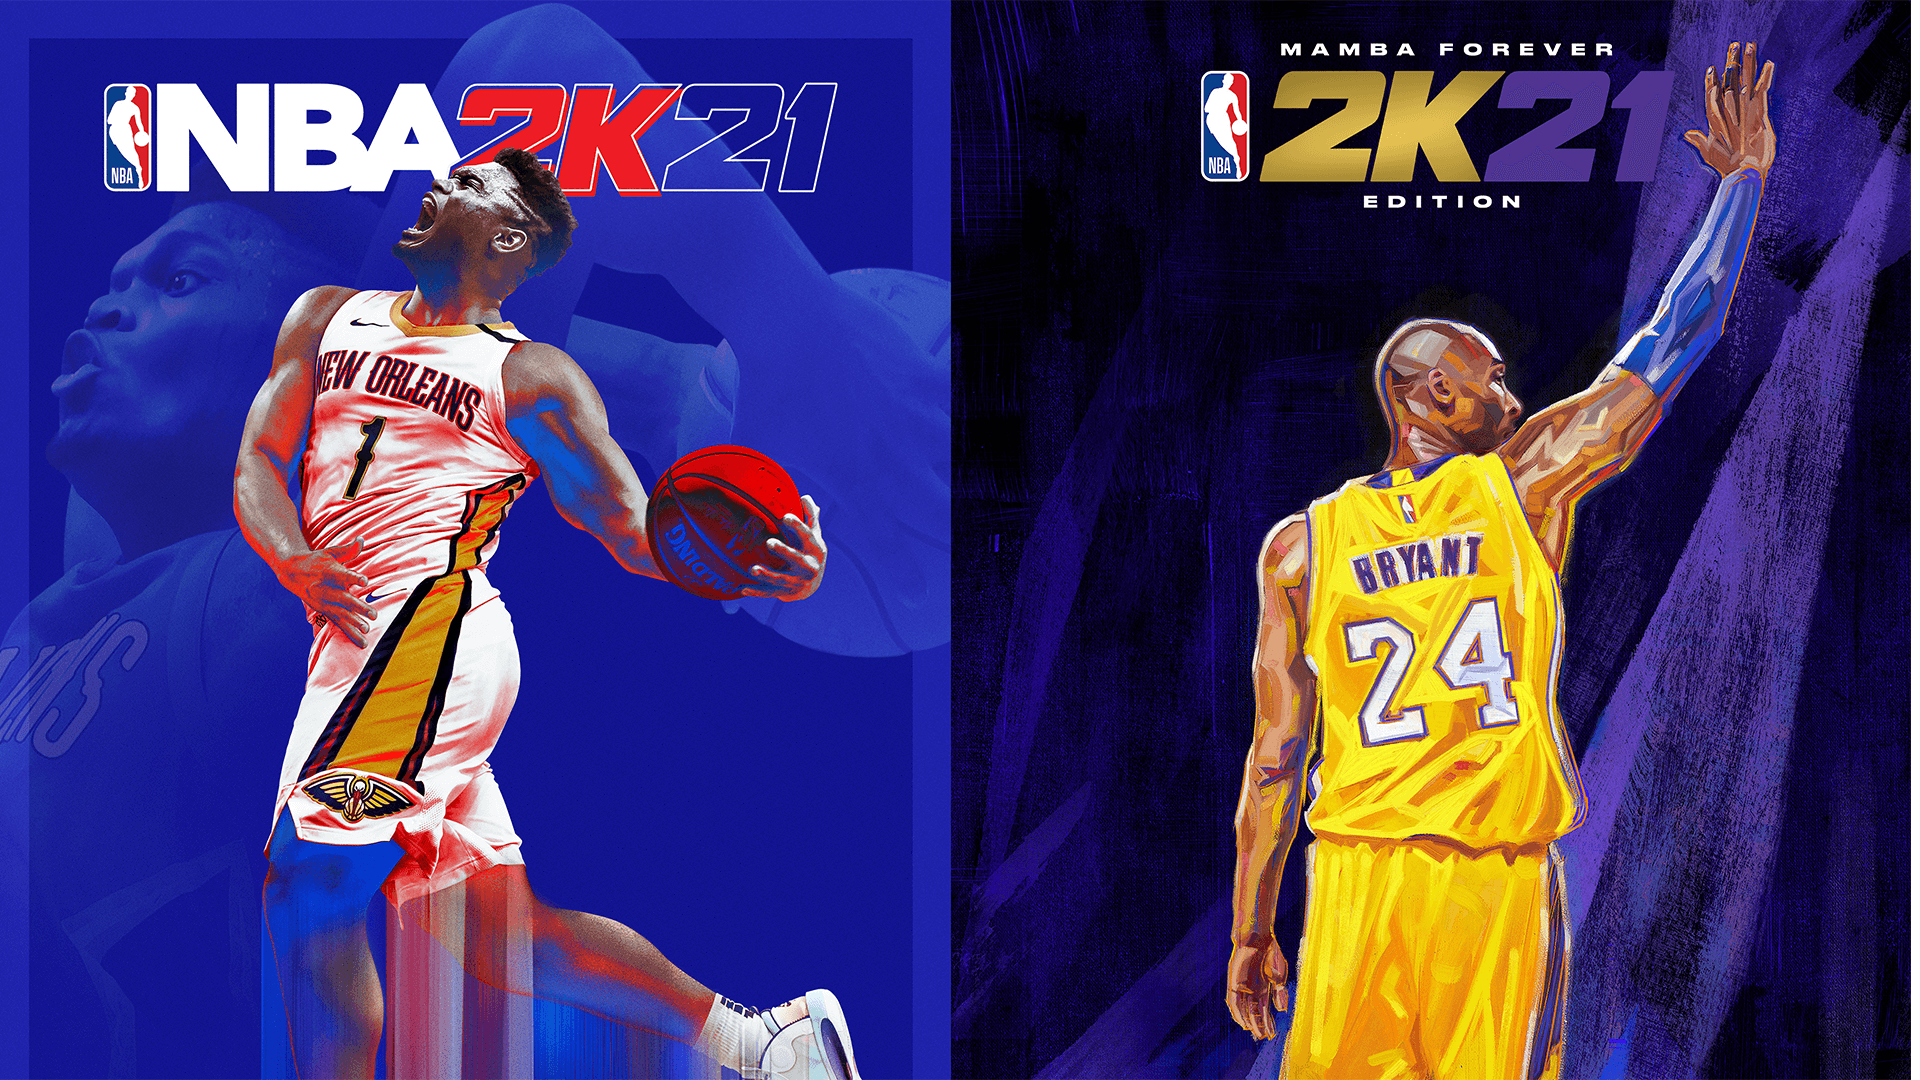 NBA 2K21 is Now Available on Next-Gen